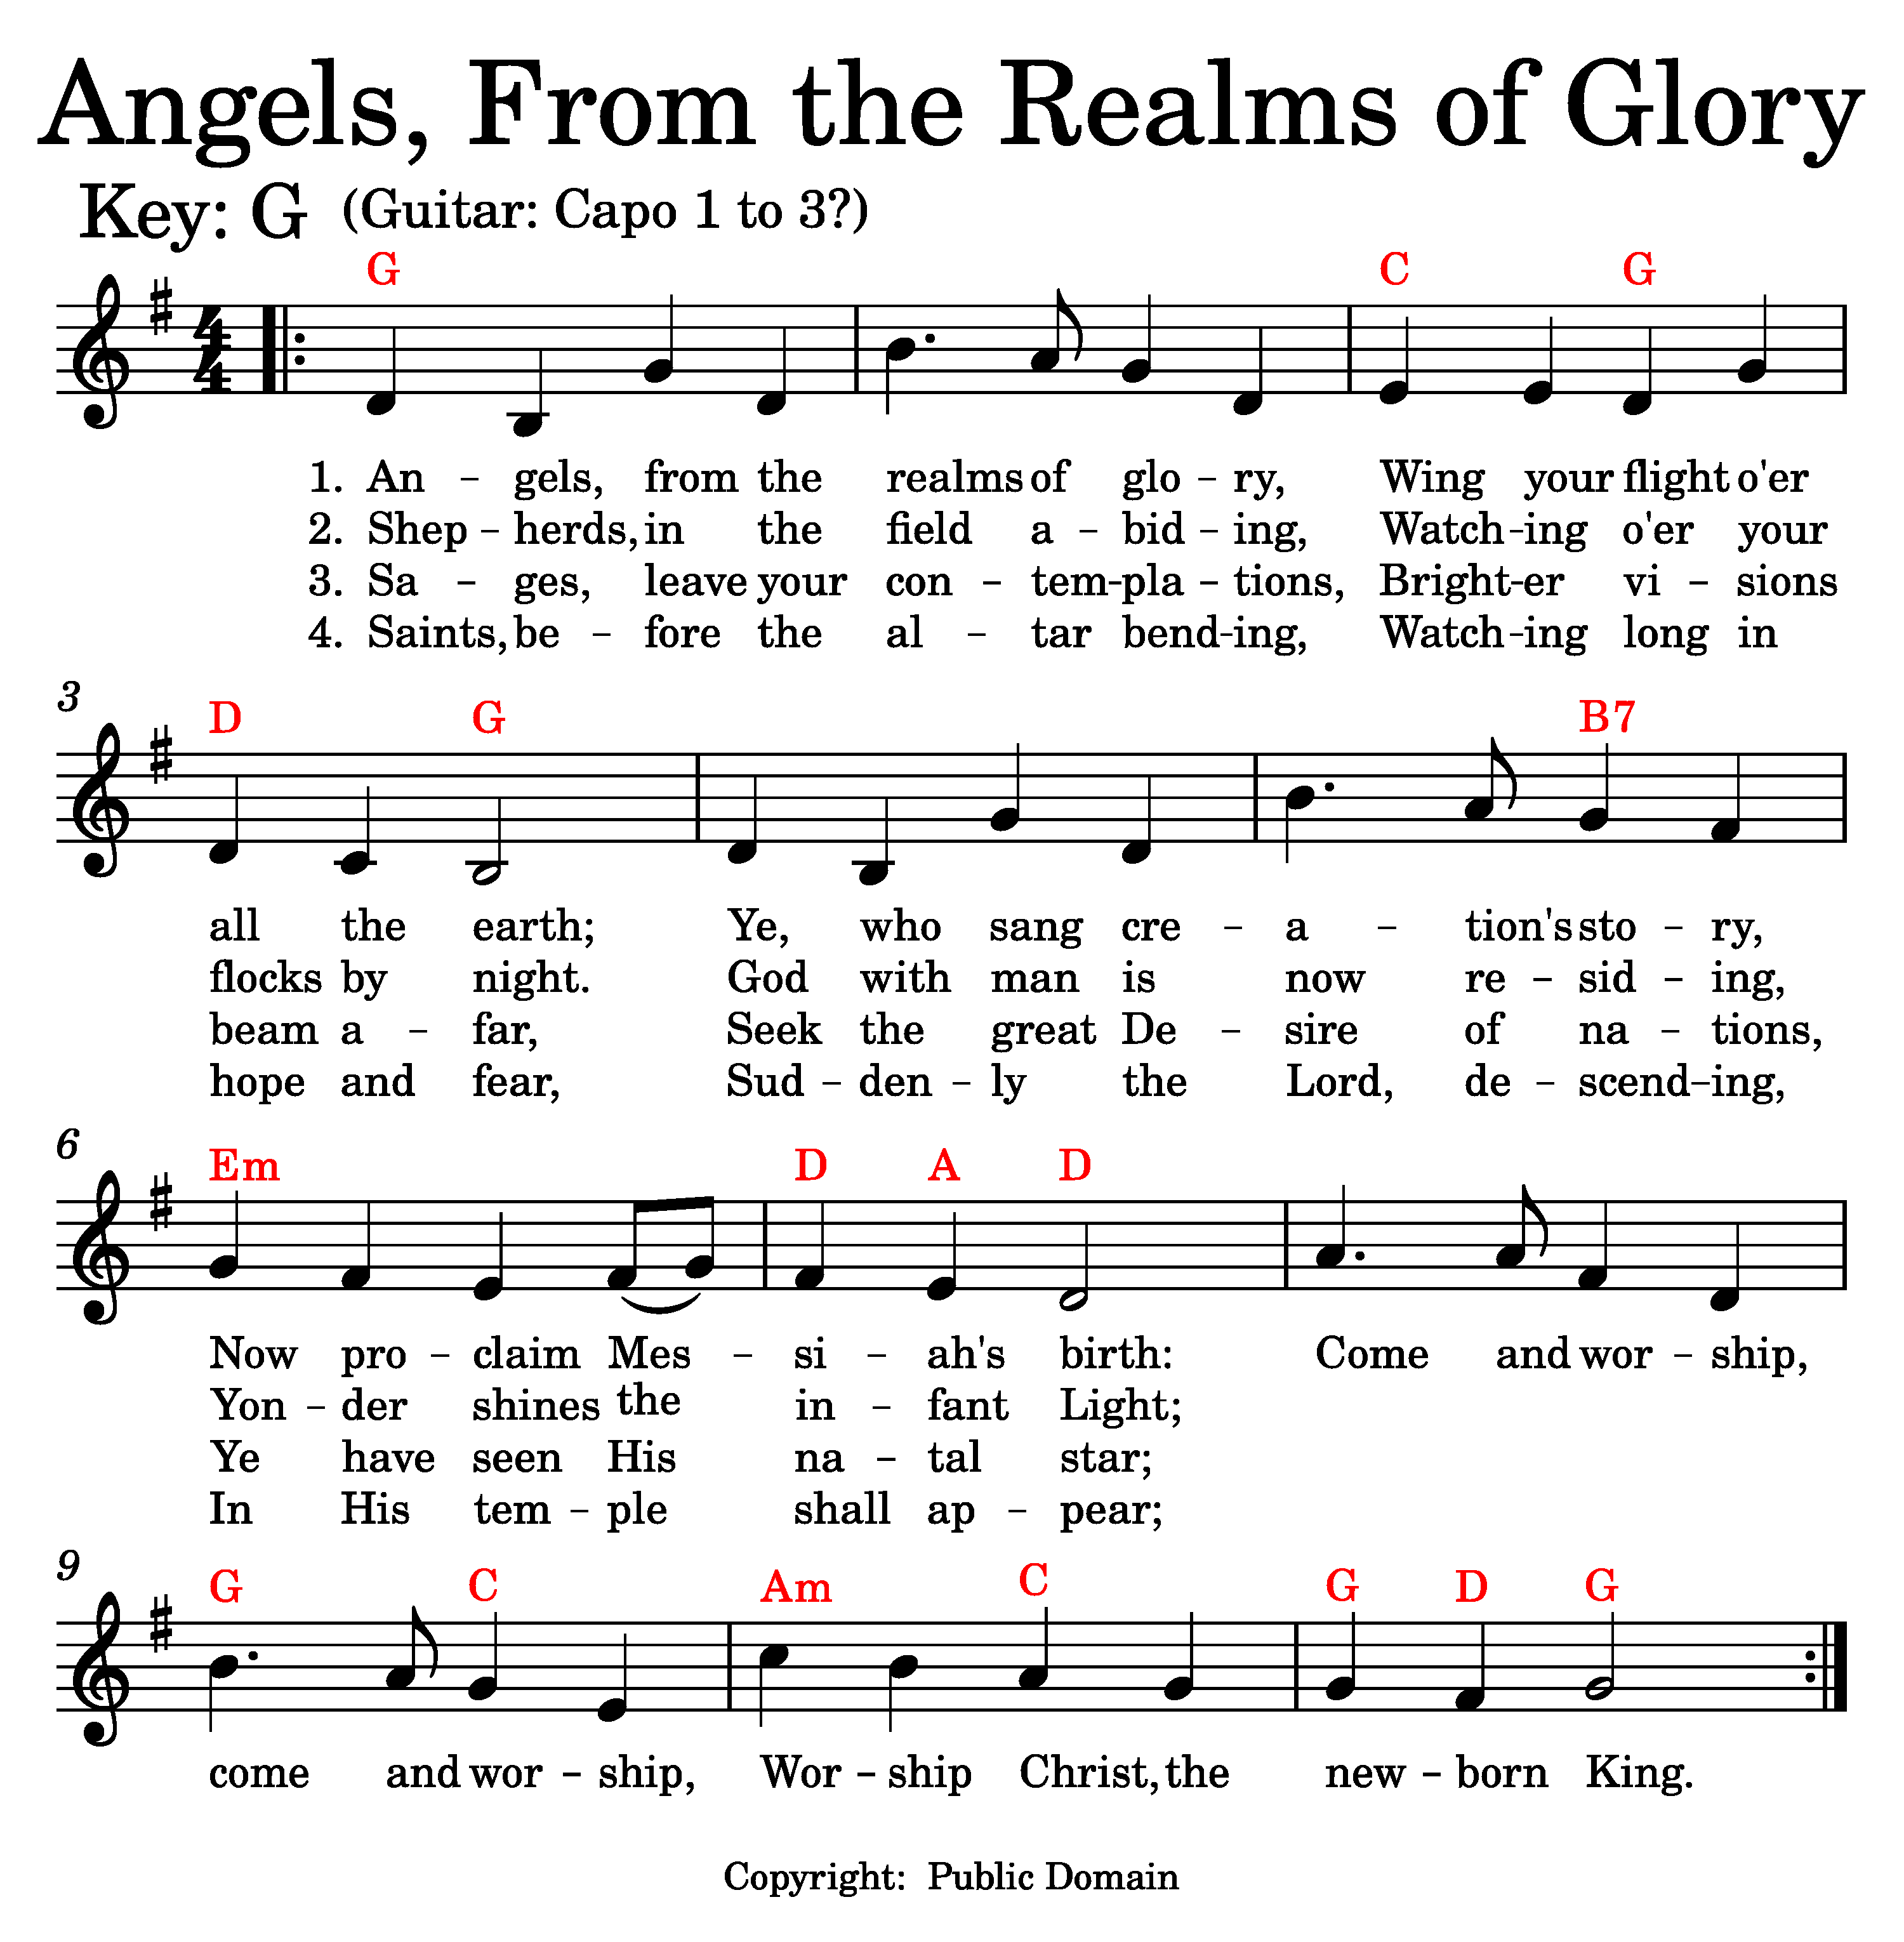 Angels from the Realms of Glory music and lyrics.